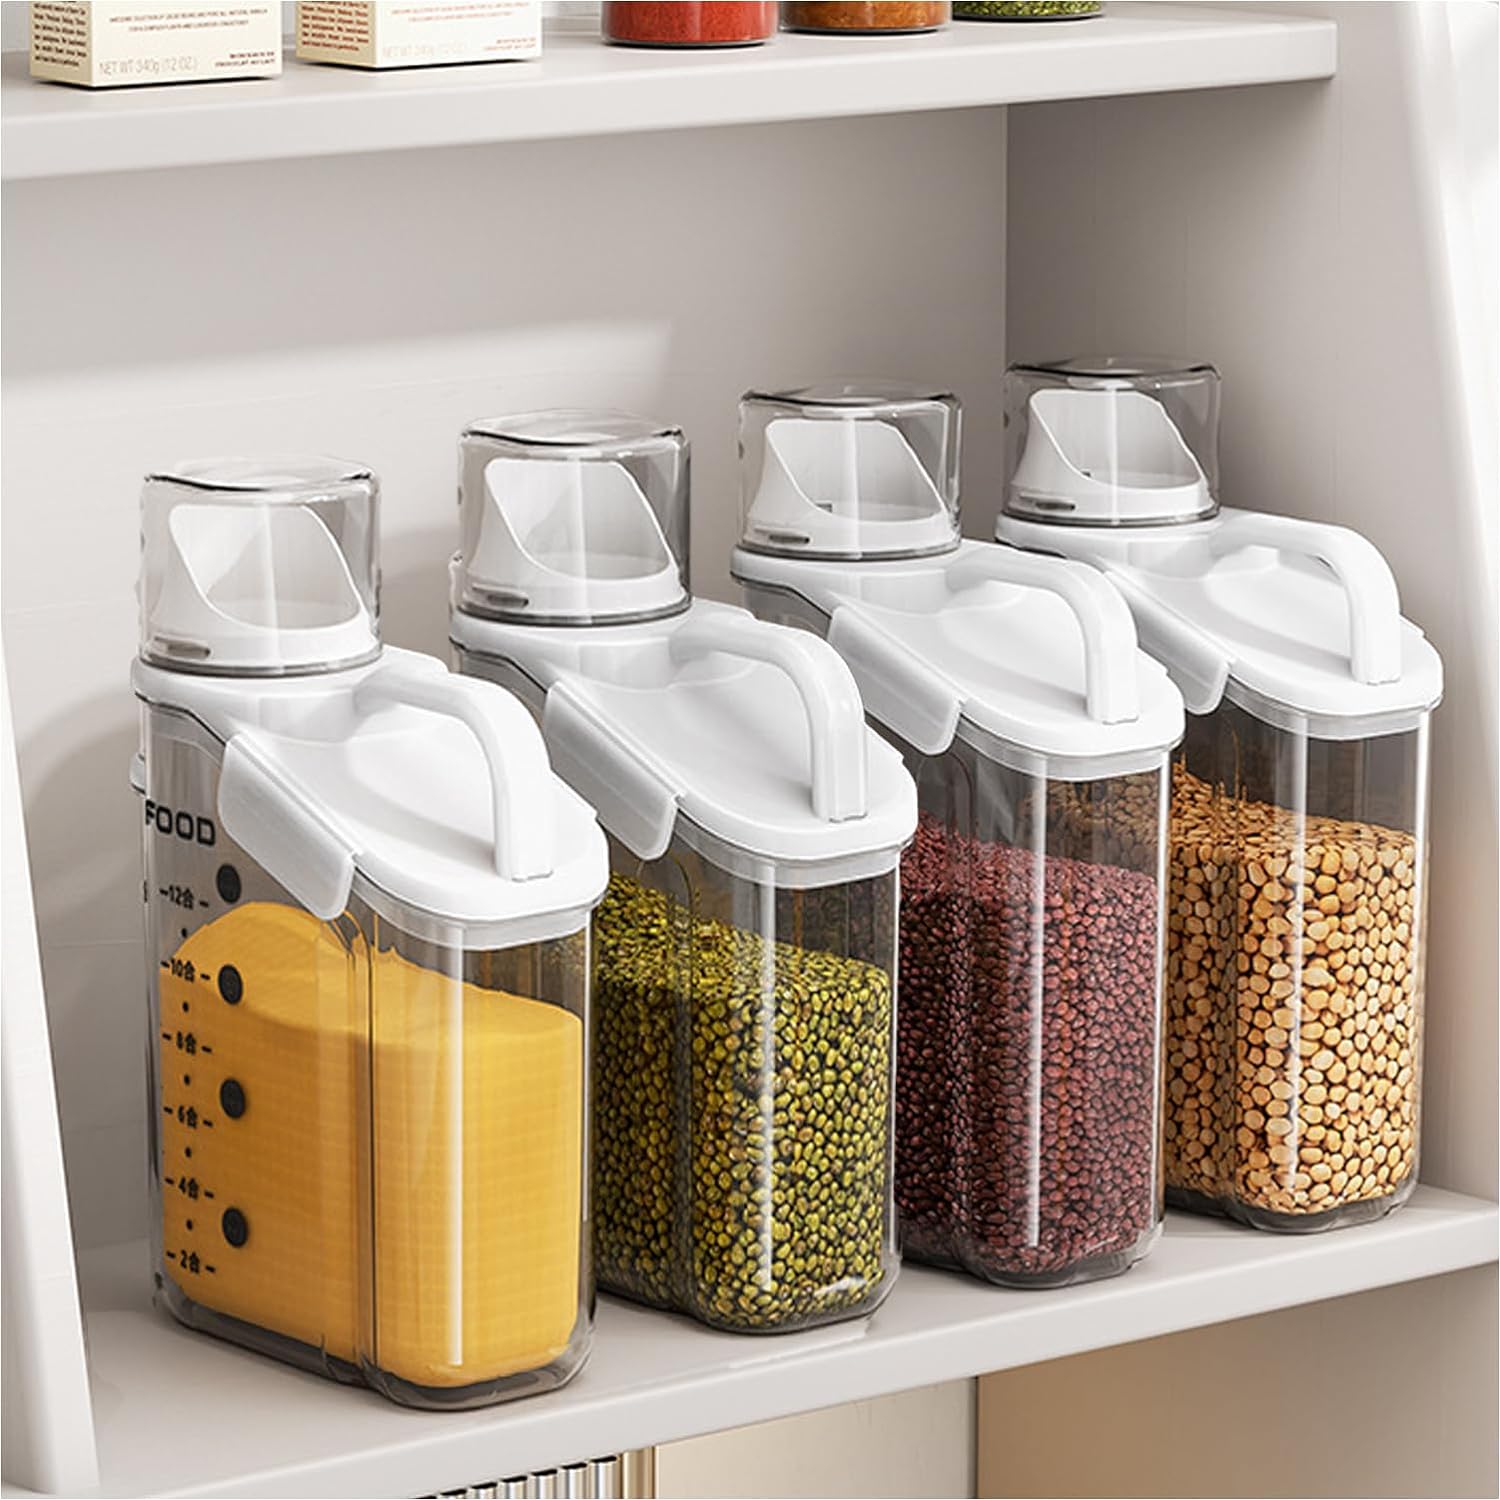 LANGMINGDE 1 Piece Cereal Containers Storage, 2.8L/95oz Airtight Large Dry Food Storage Containers with Pouring Spout Measuring Cup for Snacks Grain Rice,BPA Free Dispenser Plastic Bin, 1PC White